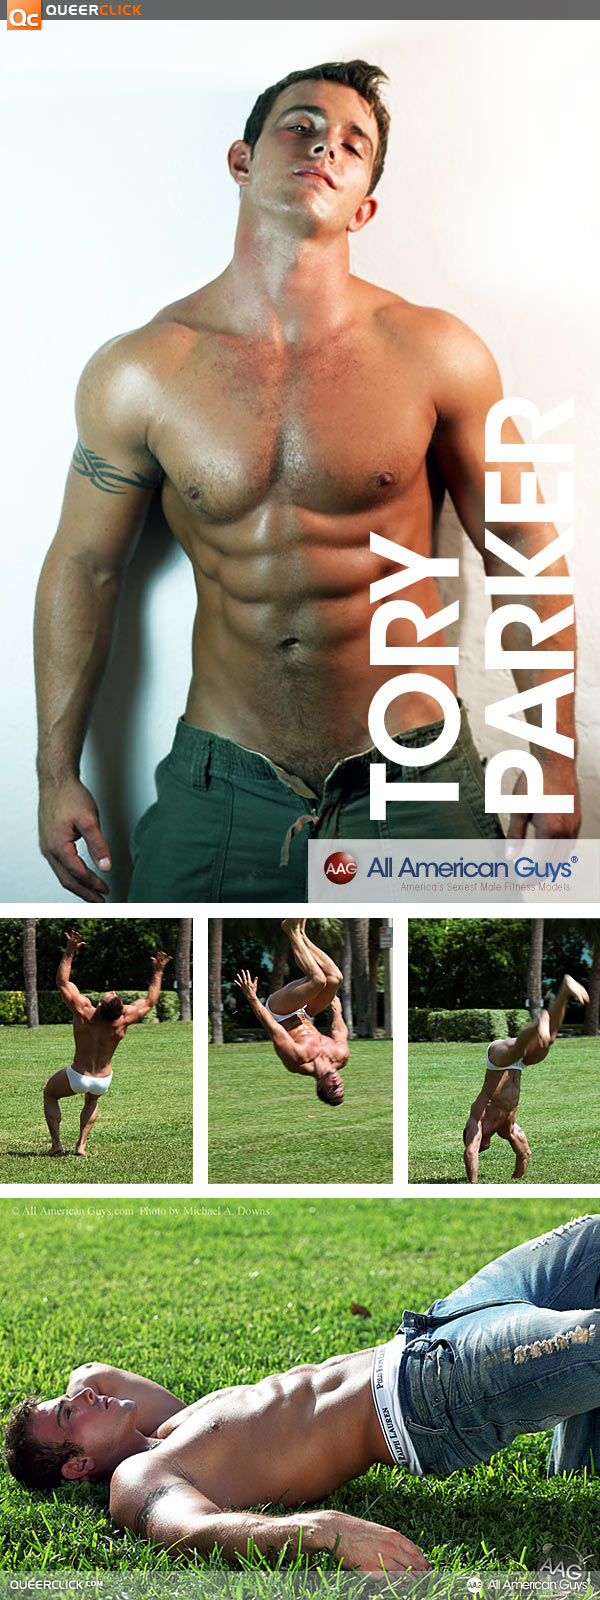 All American Guys Models Porn - AllAmericanGuys at QueerClick - Page 2 of 3